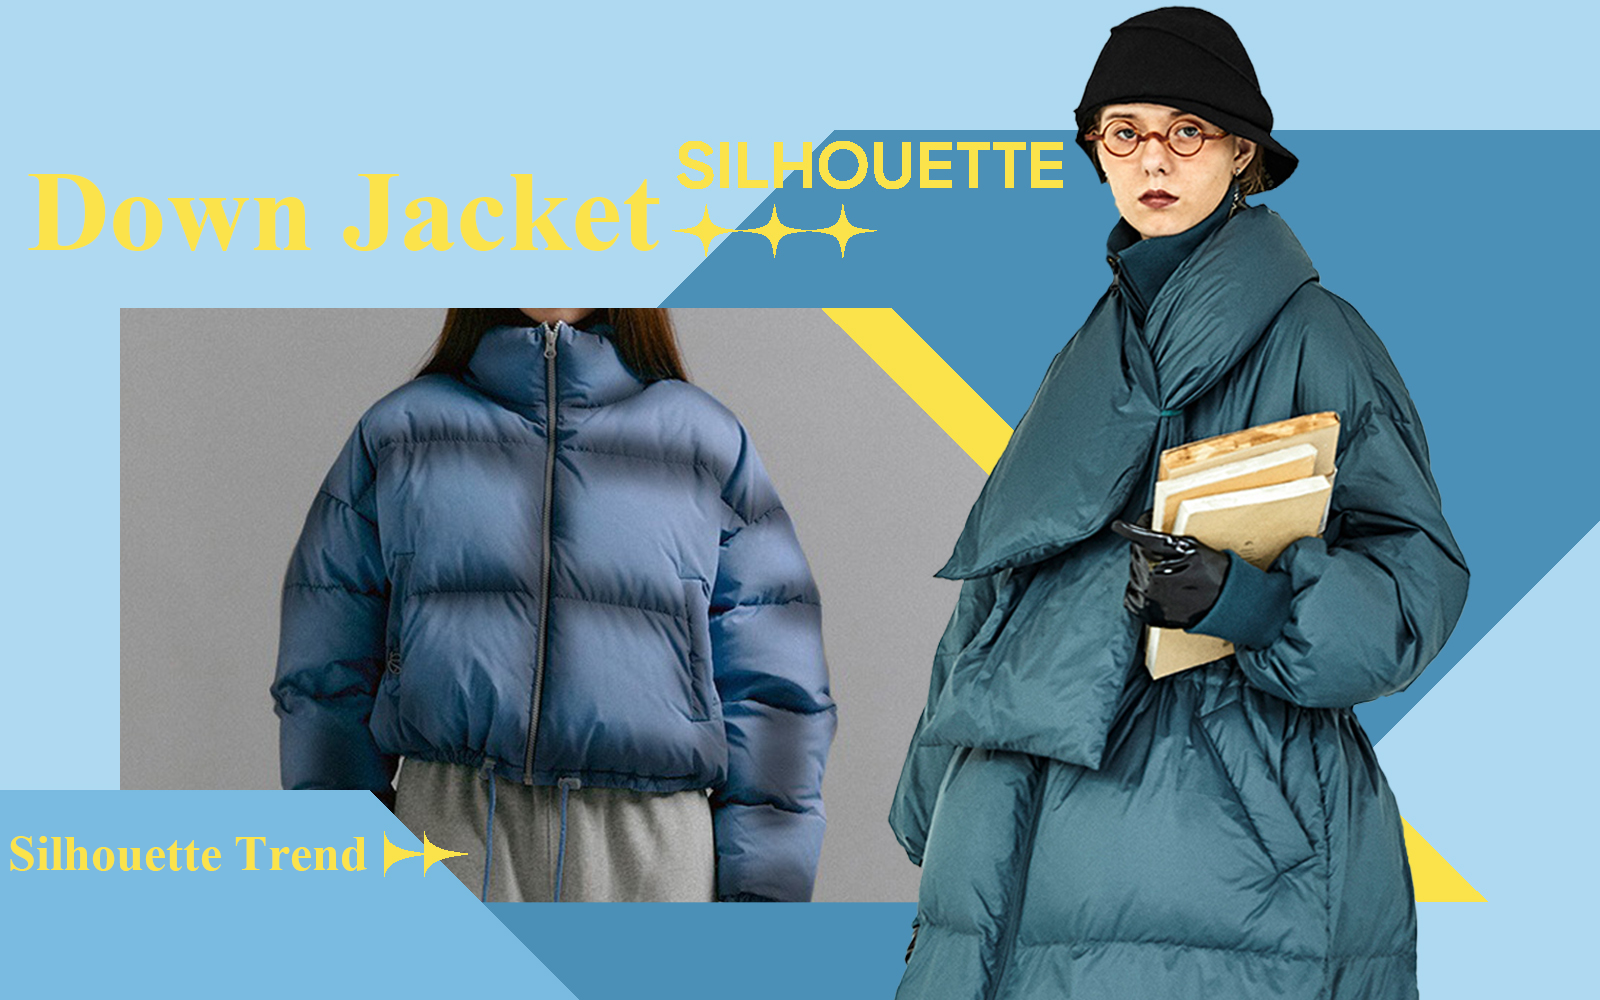 Comfortable & Practical -- The Silhouette Trend for Women's Down Jacket